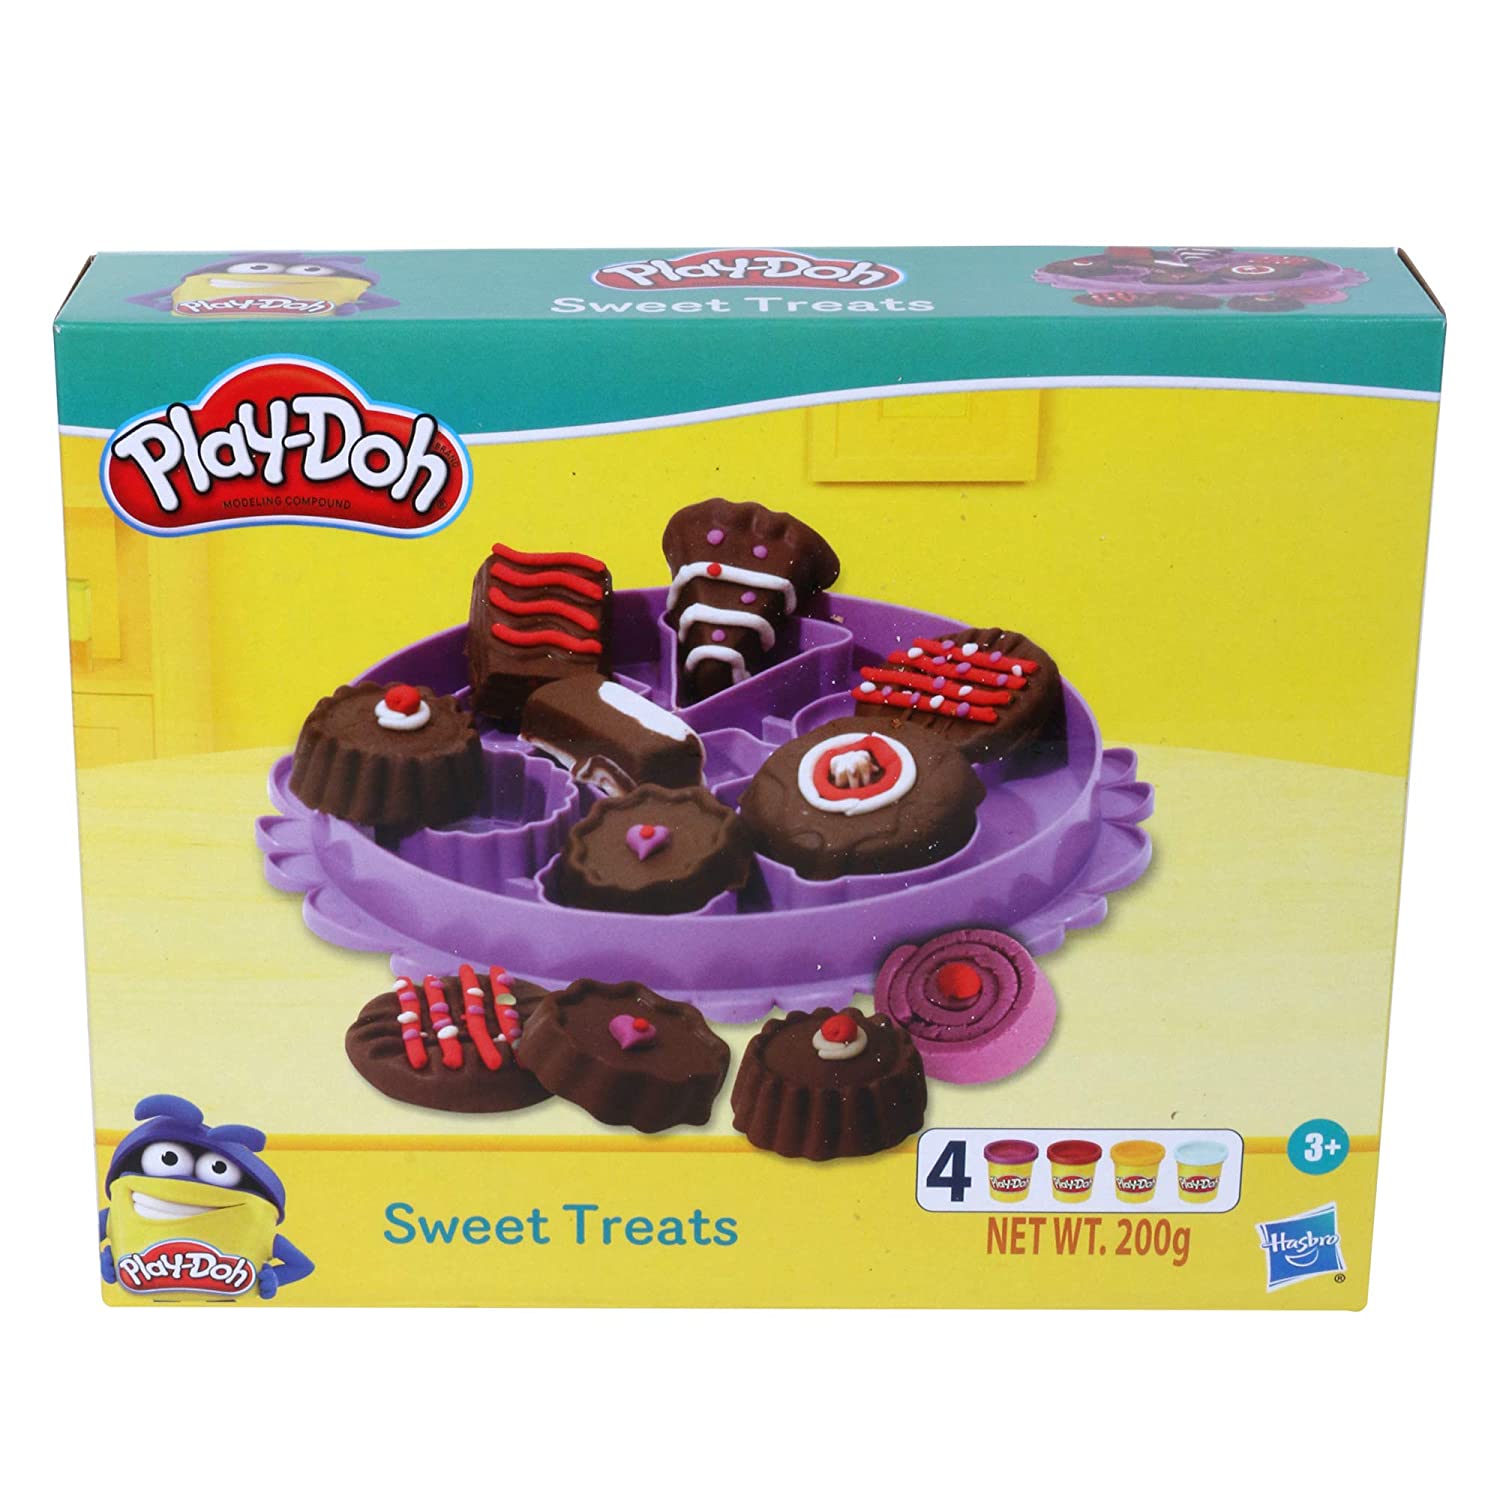 PLAYDOH Sweet Treats Playset for Kids 3 Years and Up with 4 NonToxic